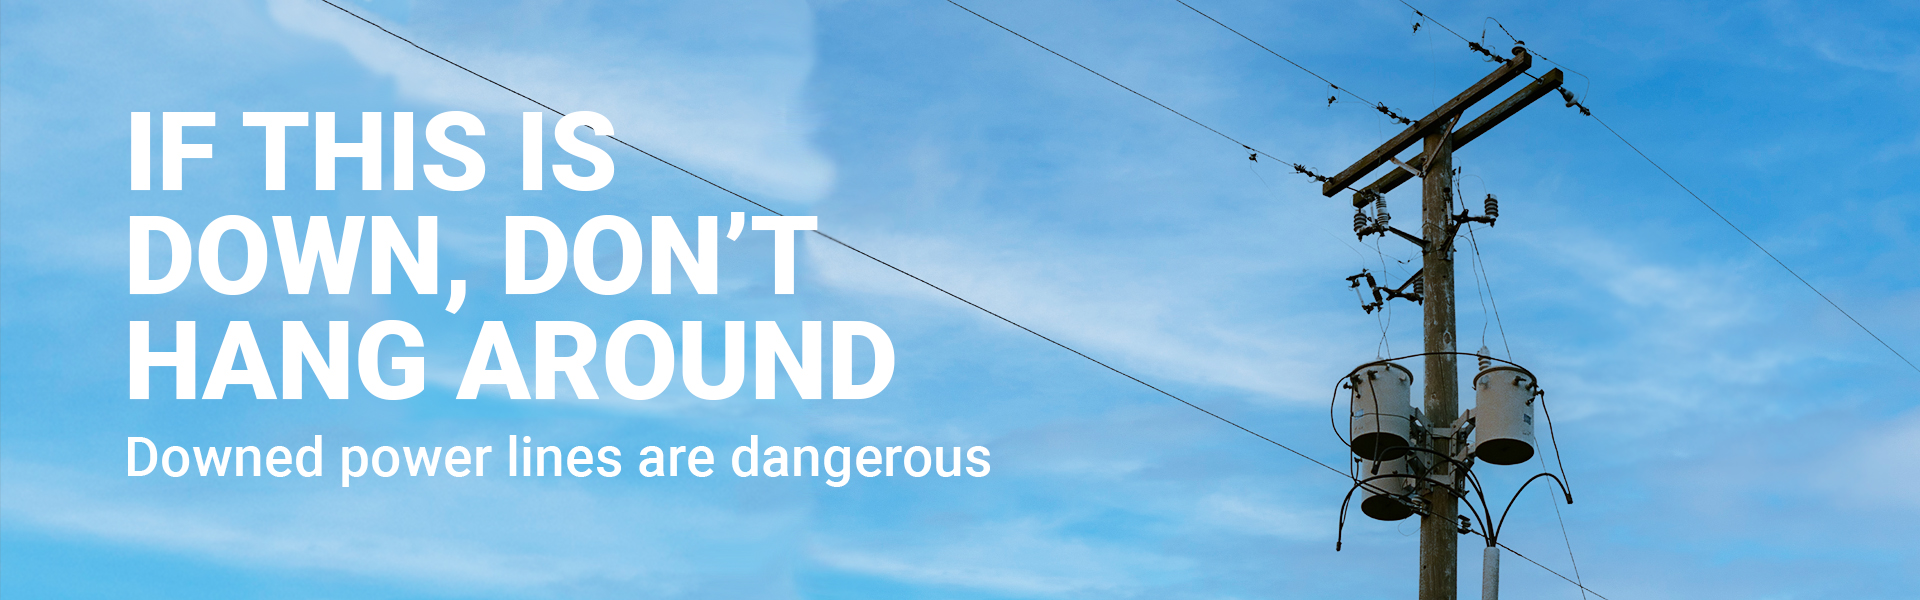 Image of a power line. Stay clear. Stay safe. Down power lines are dangerous.